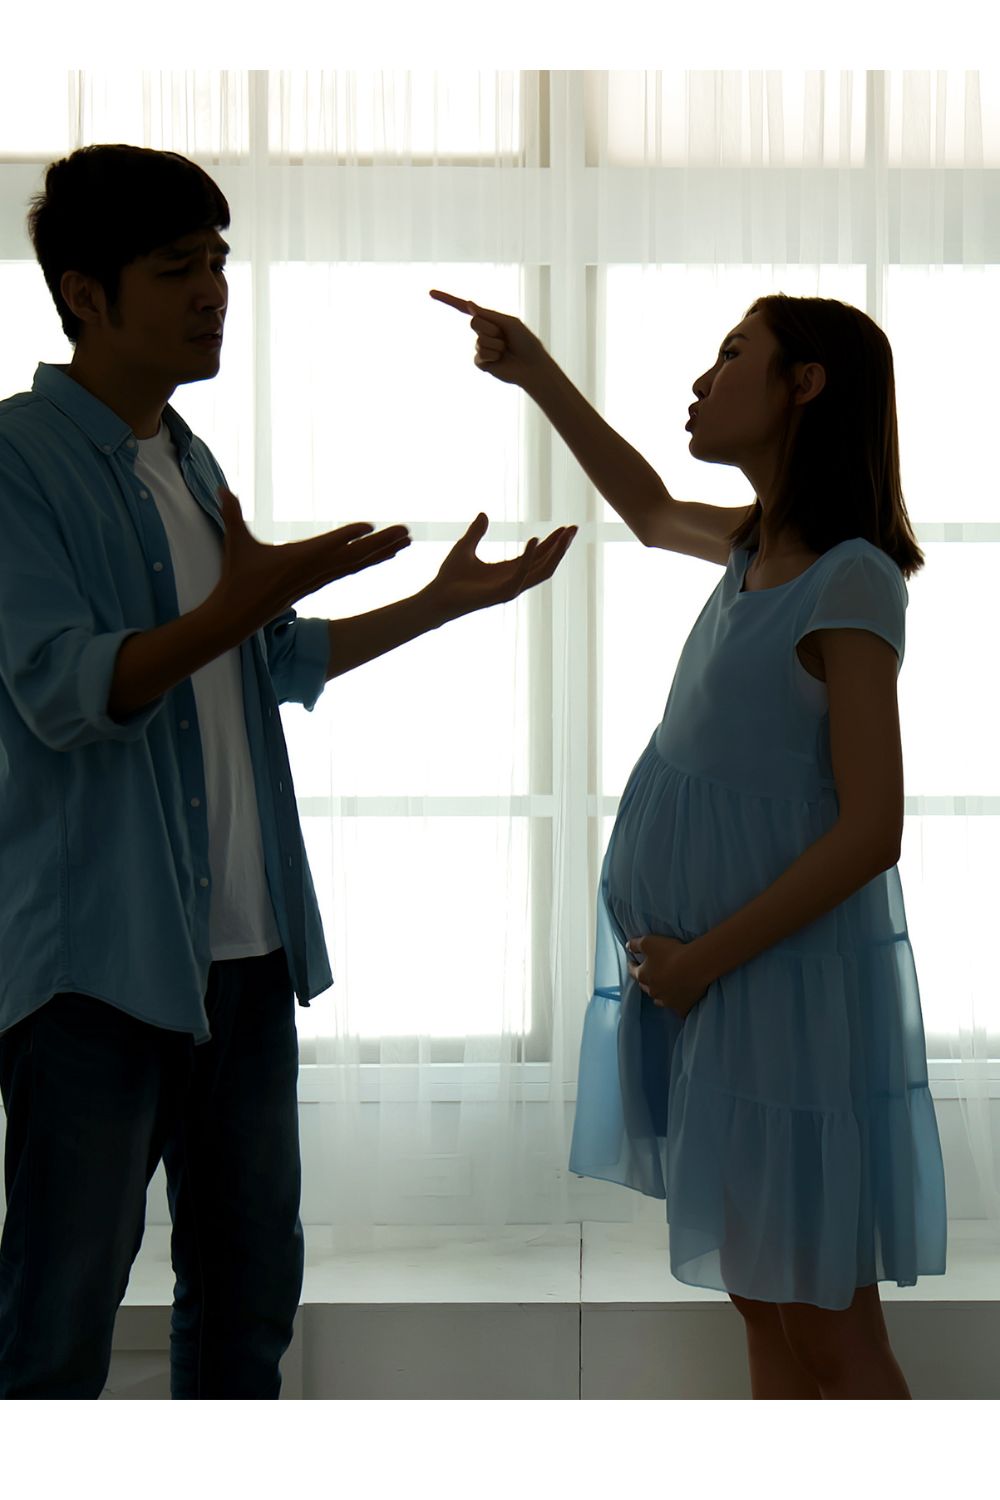 Why Is My Pregnant Wife So Mean To Me?